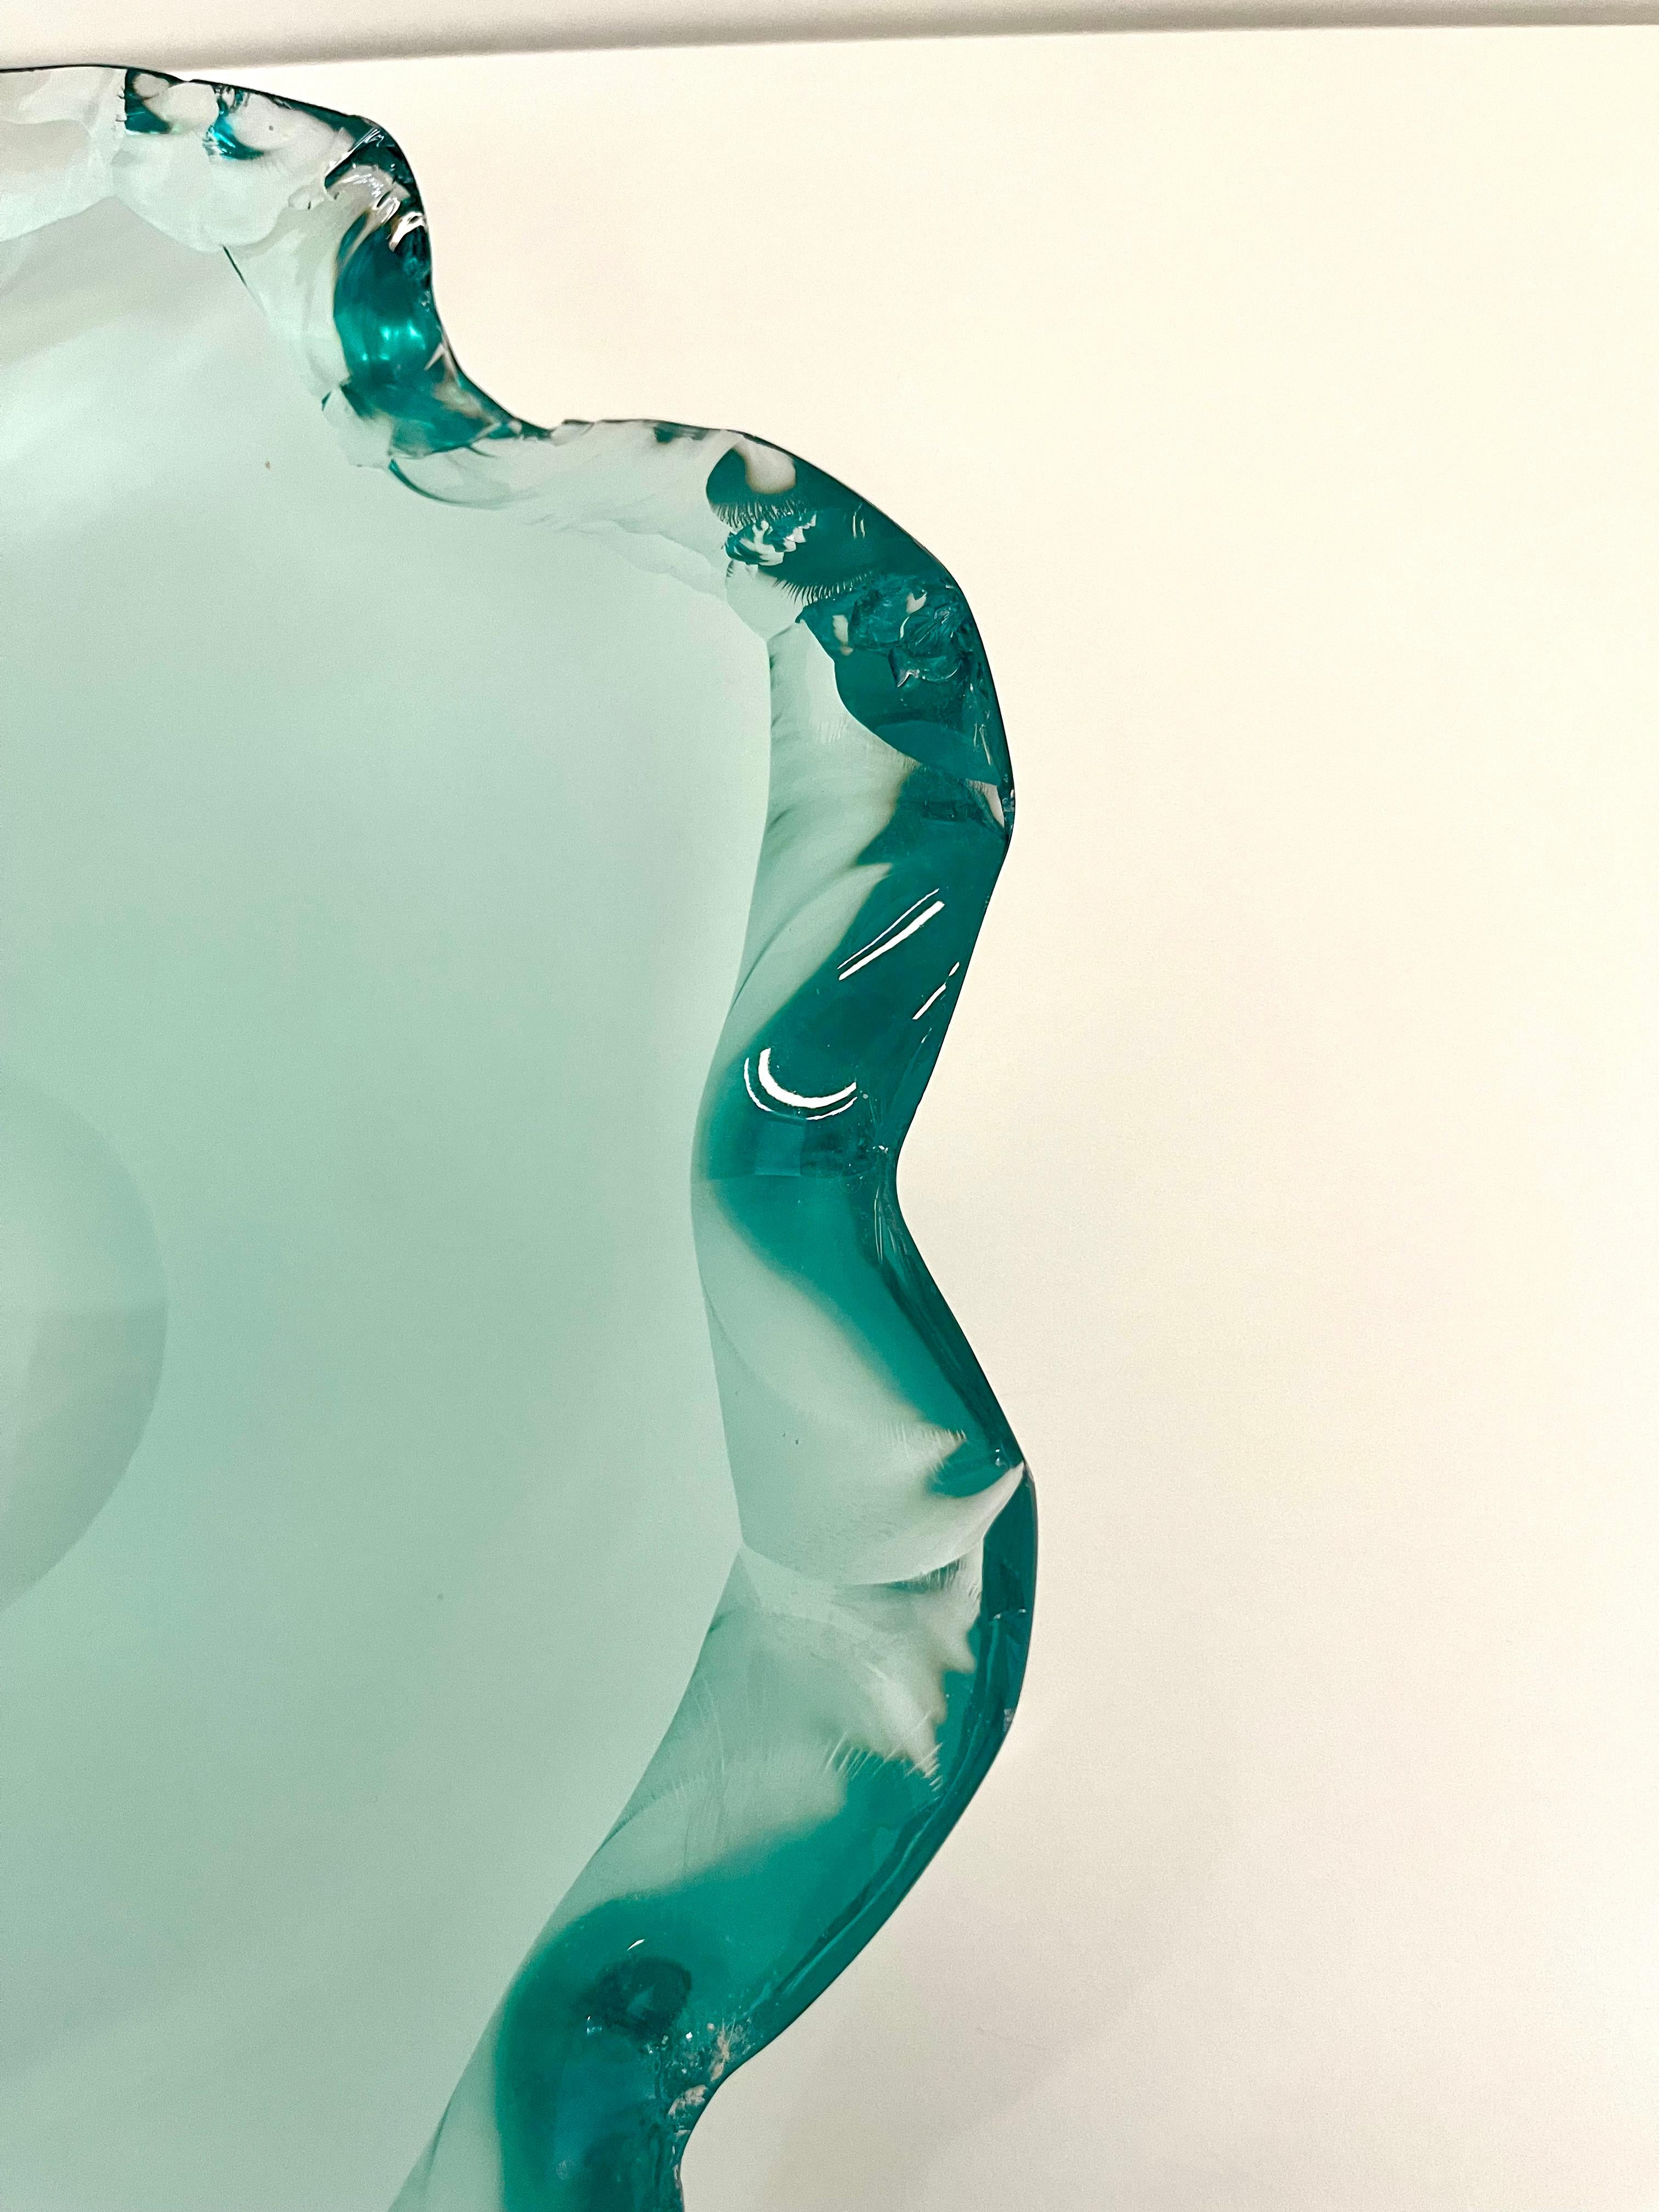 20 mm / 0.78'' thick aquamarine crystal bowl.
Each step-bending, grinding, carving-was entirely done by hand.
In addition to its original shape, this bowl owes its distinctiveness mainly to its rim, which has been chiseled with extreme care.
The